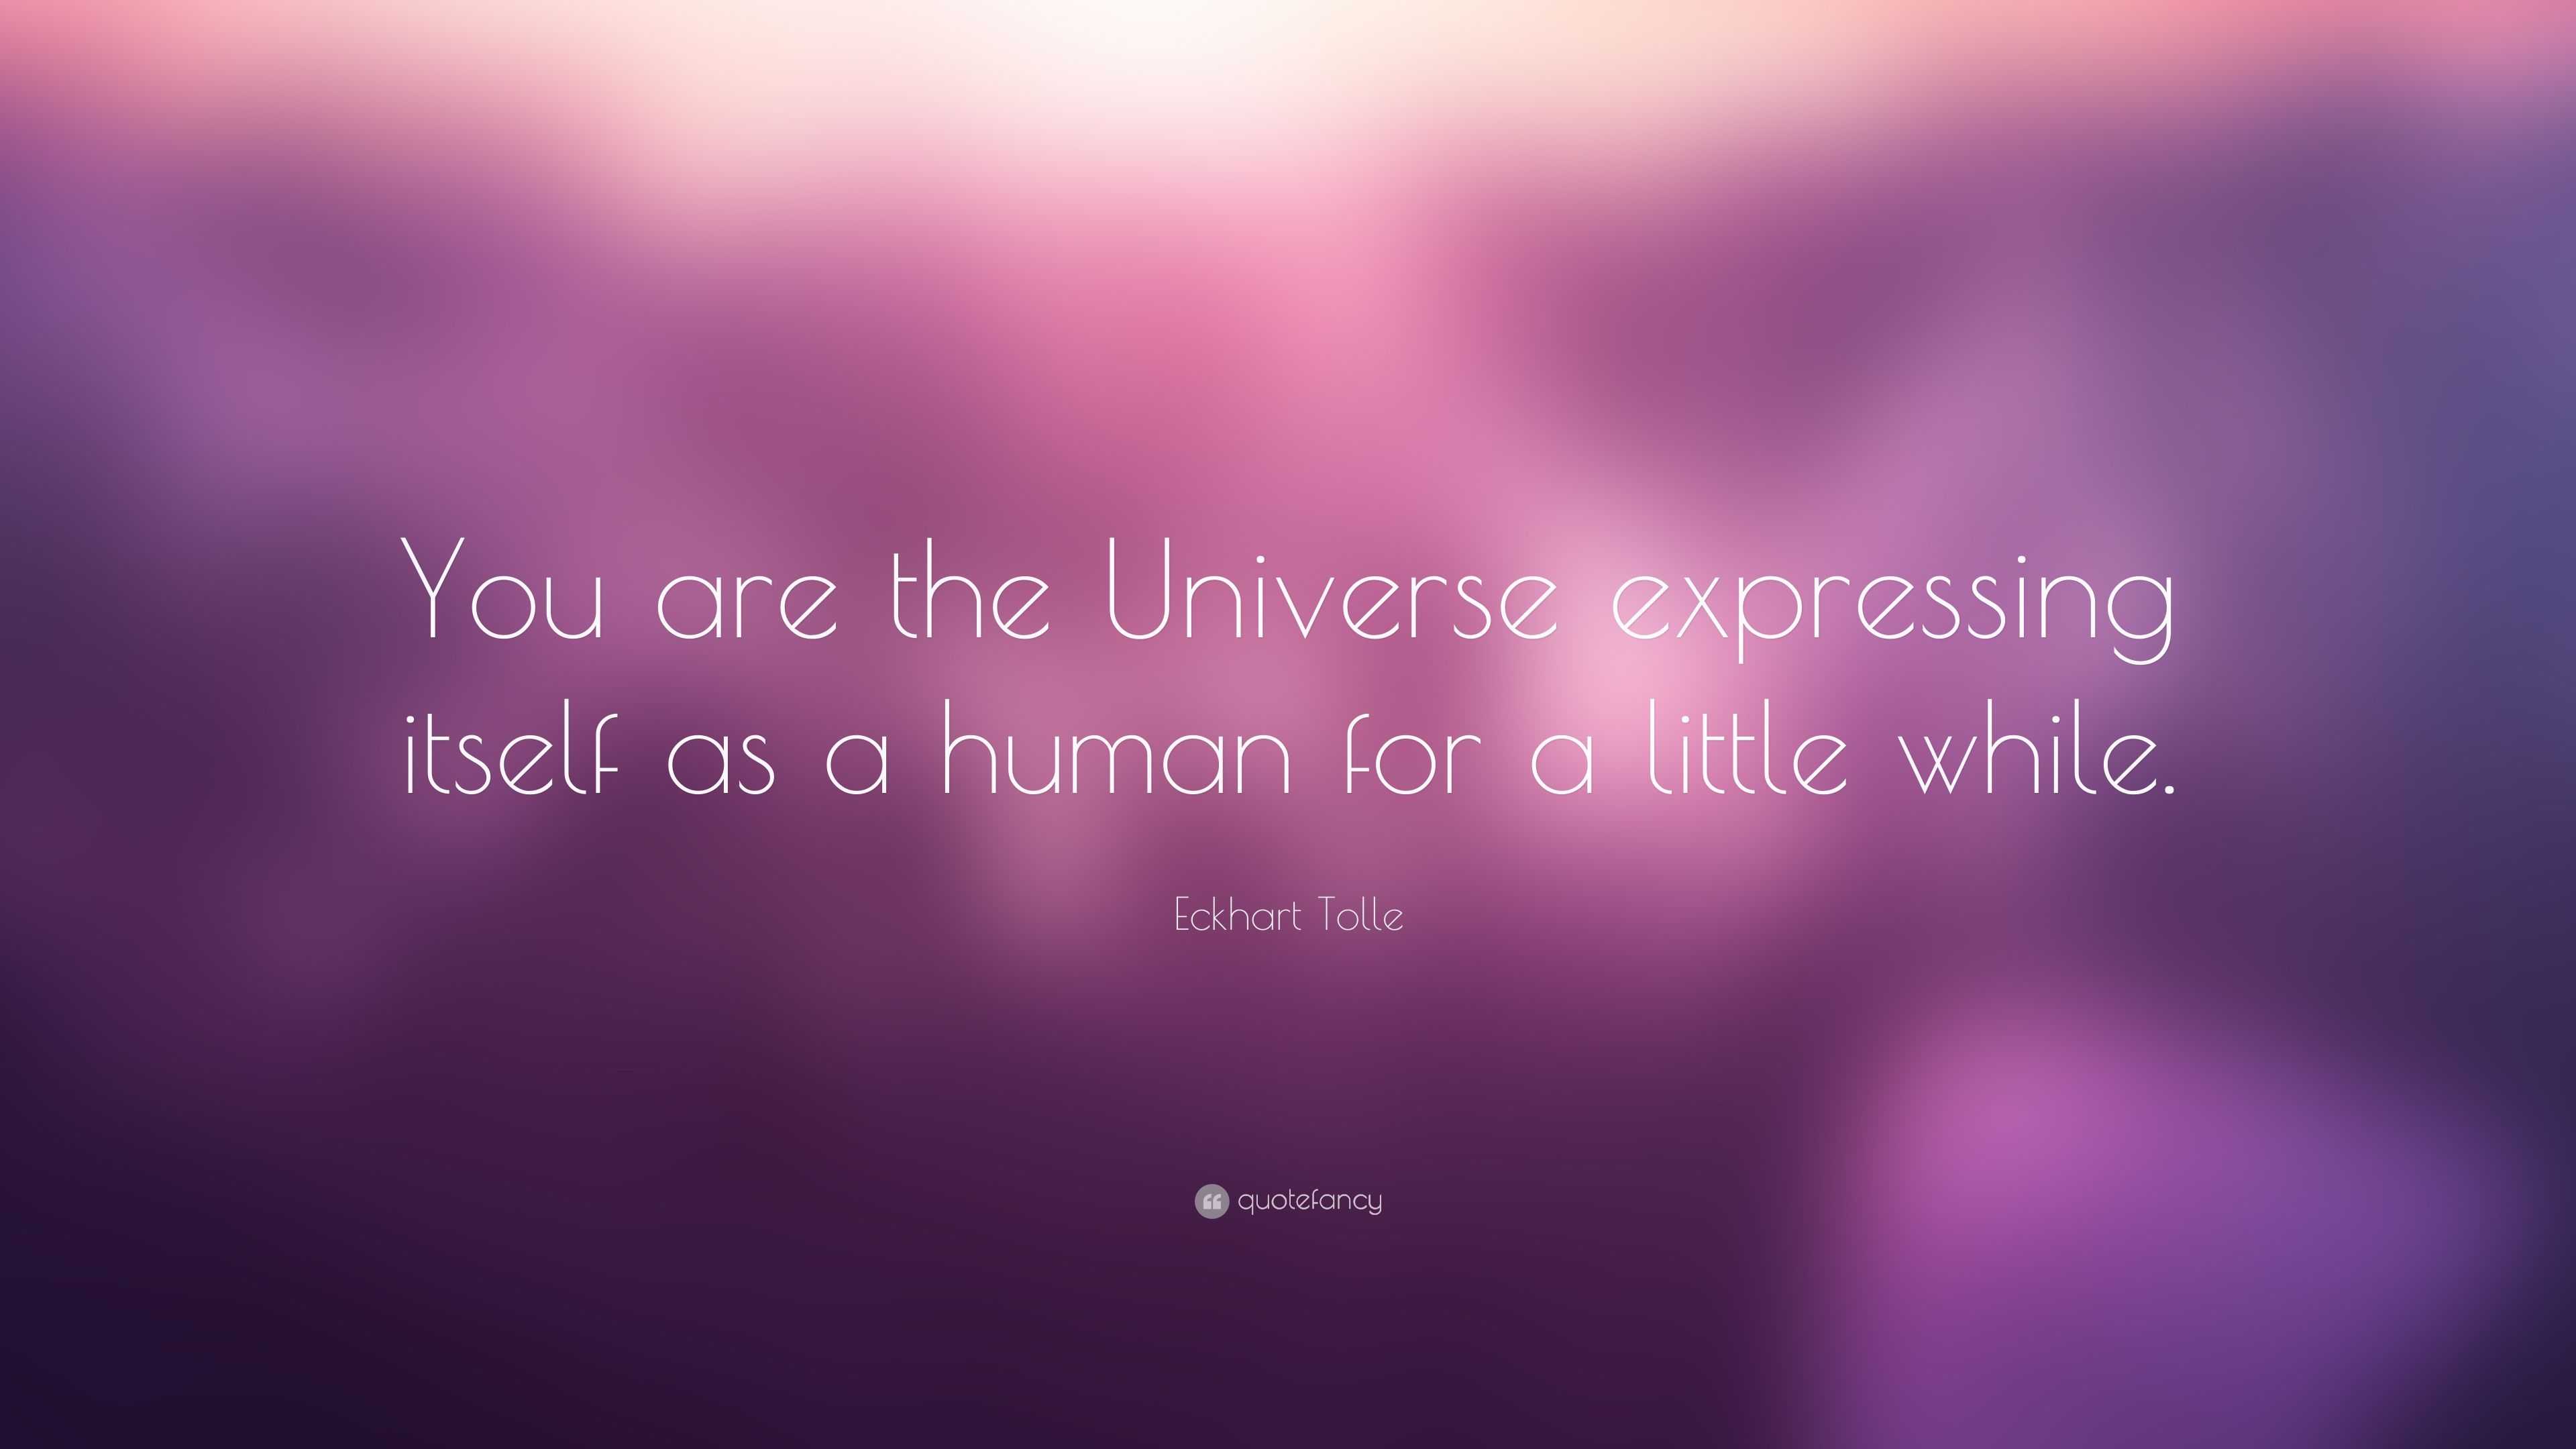 Eckhart Tolle Quote: “You are the Universe expressing itself as a human ...